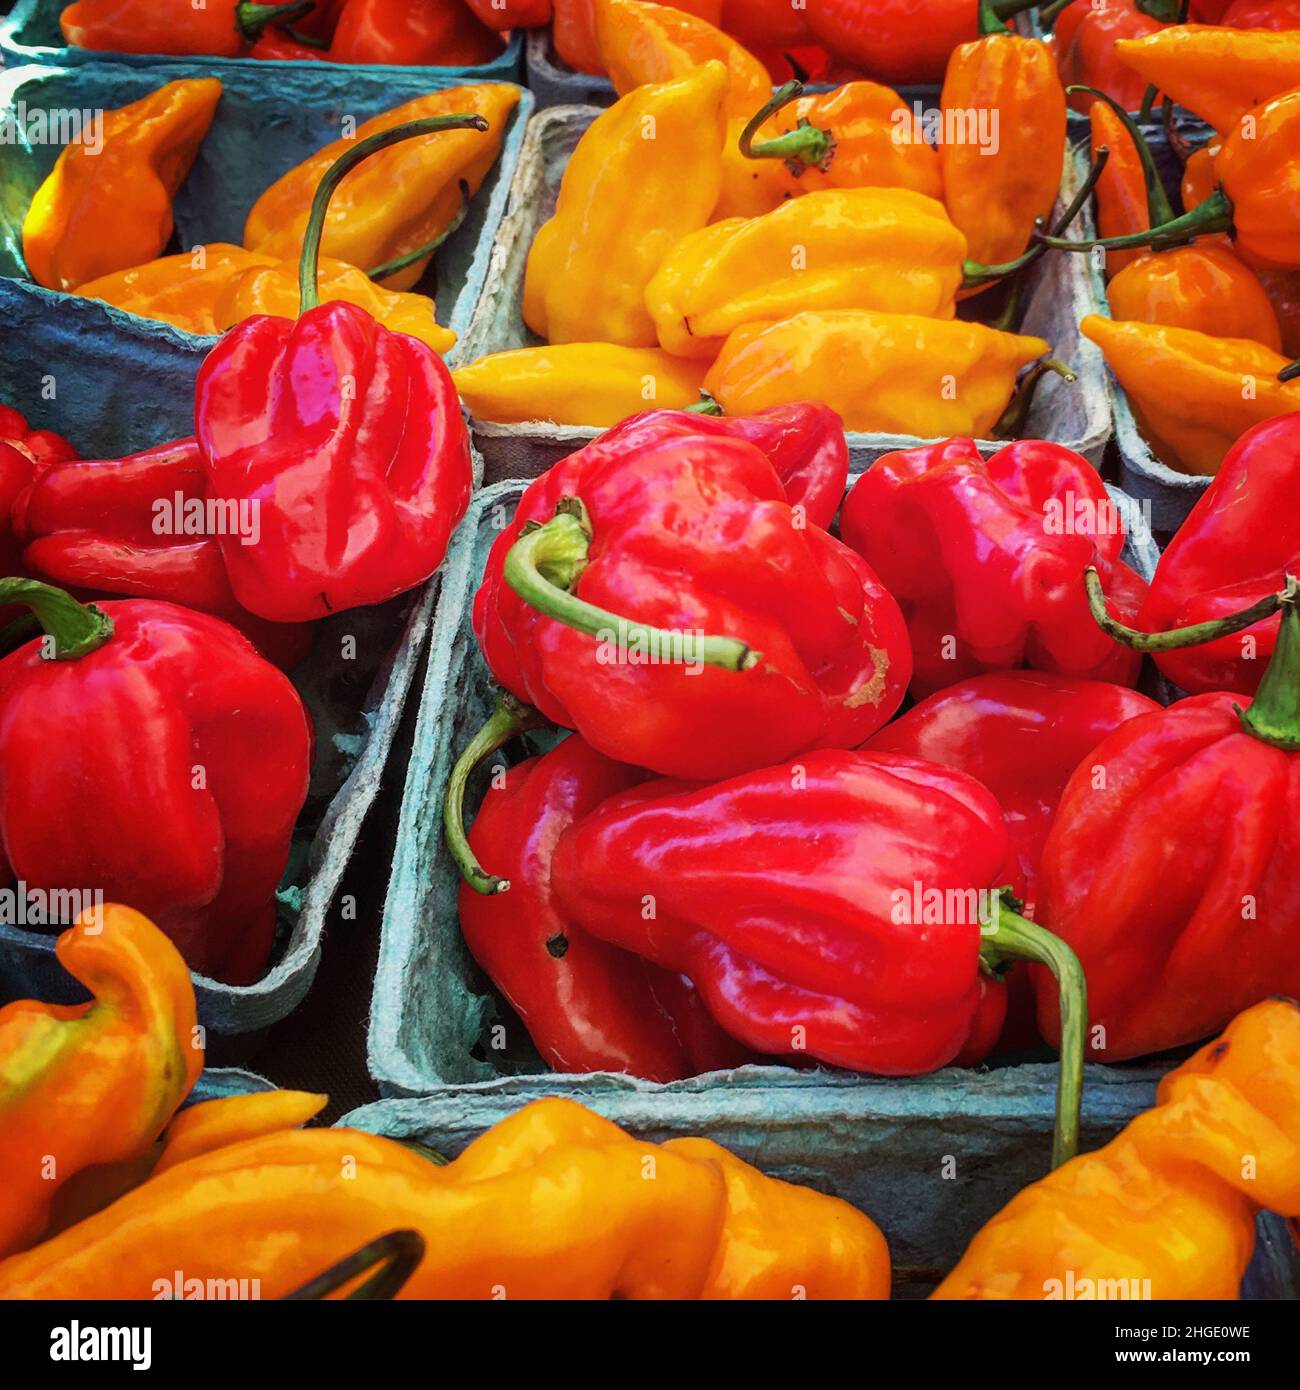 Hot chili peppers on display Stock Photo